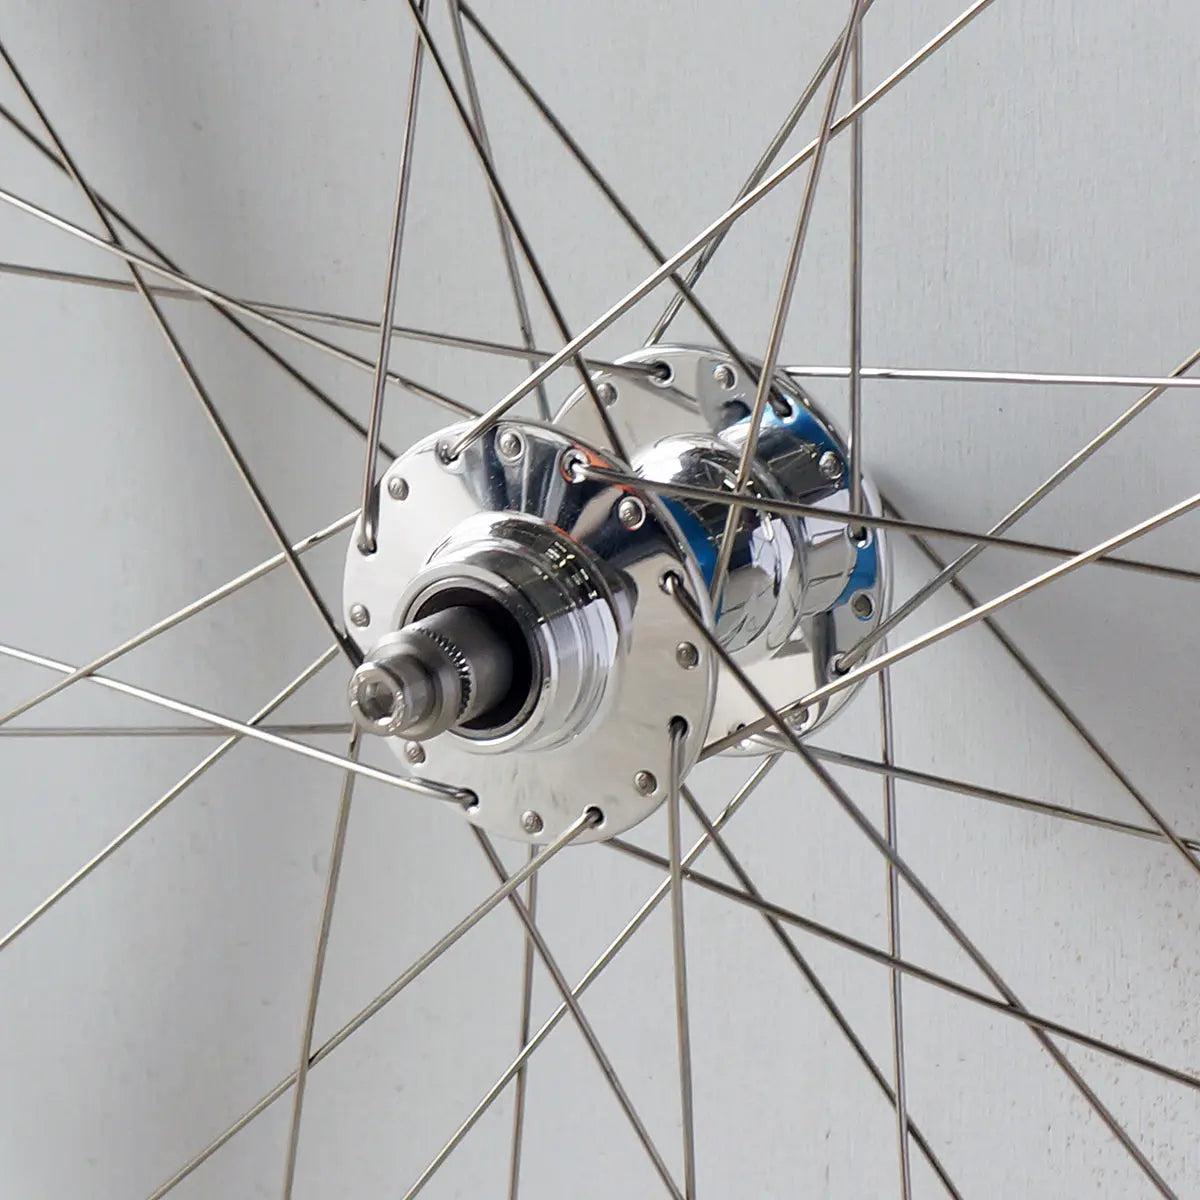 Phil Wood High Flange / H+Son Archetype 700C 32H/32H Single Speed/Fixed Wheelset-Wabi Cycles